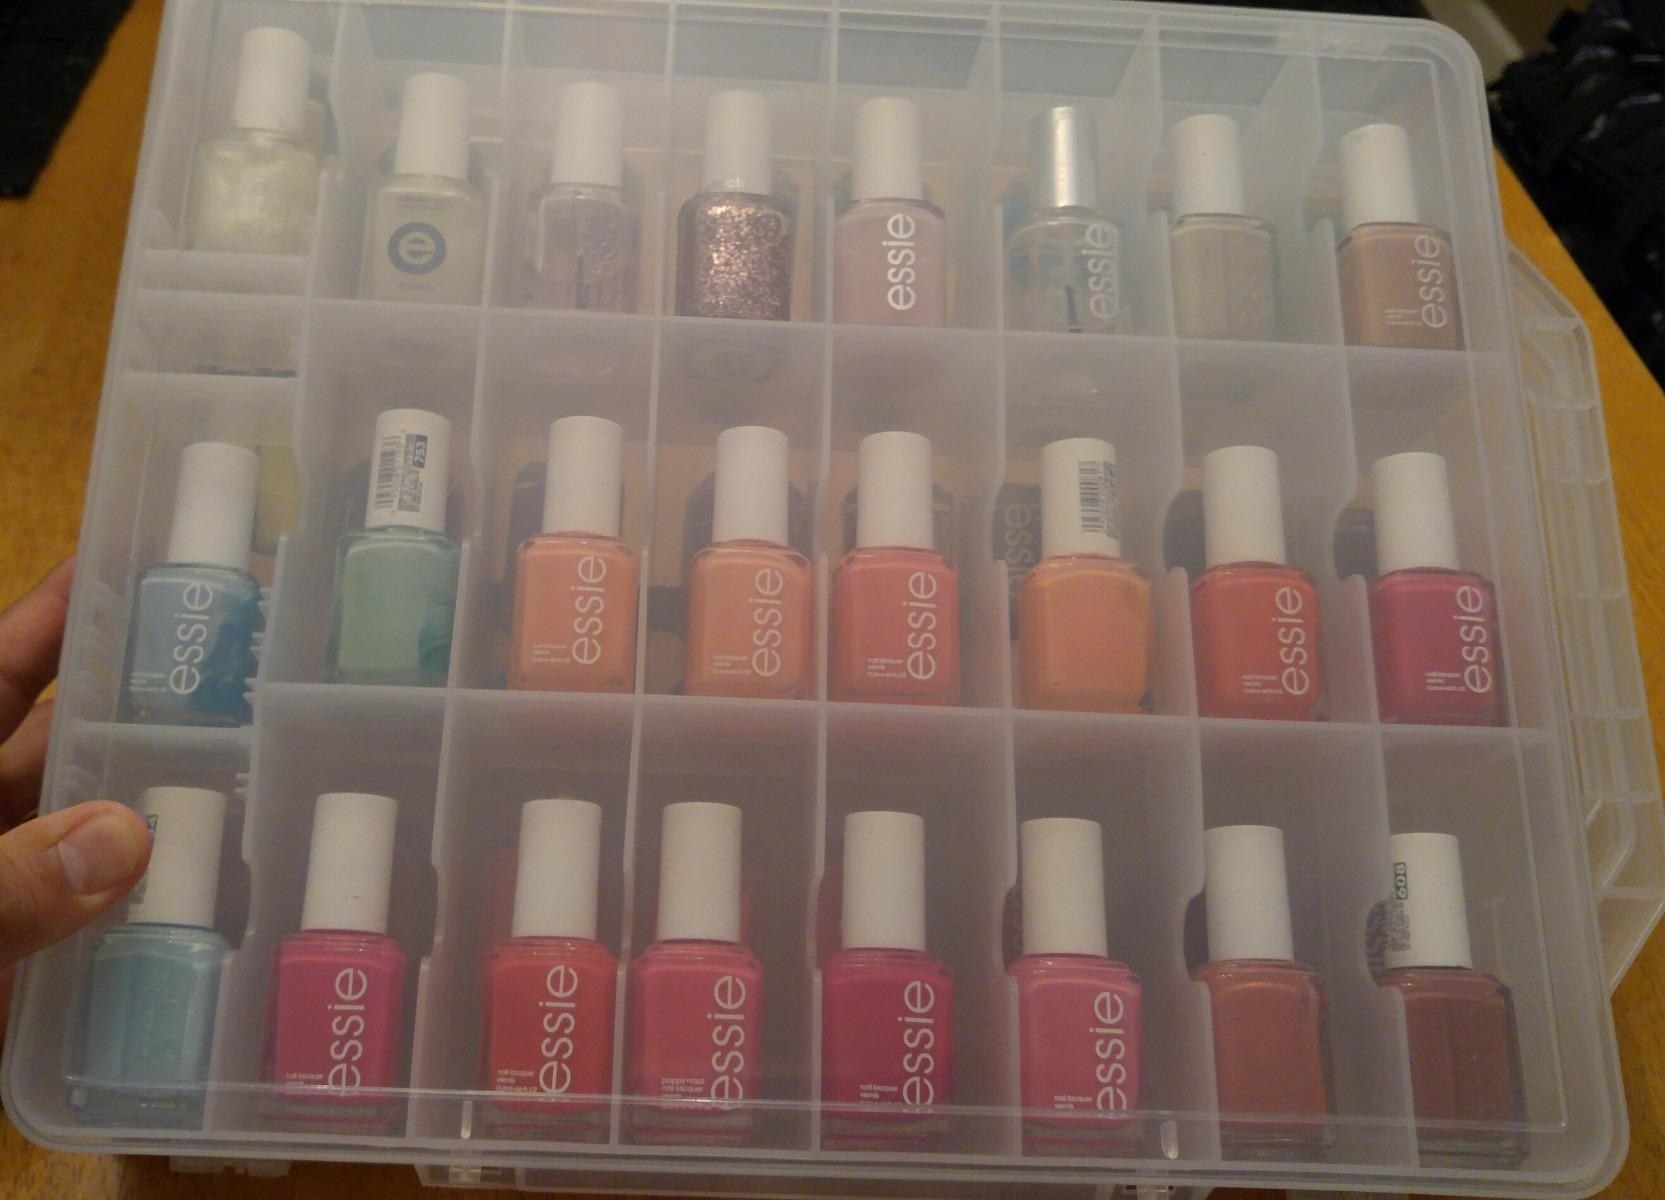 Reviewer photo of the organizer, which has three rows and is see through